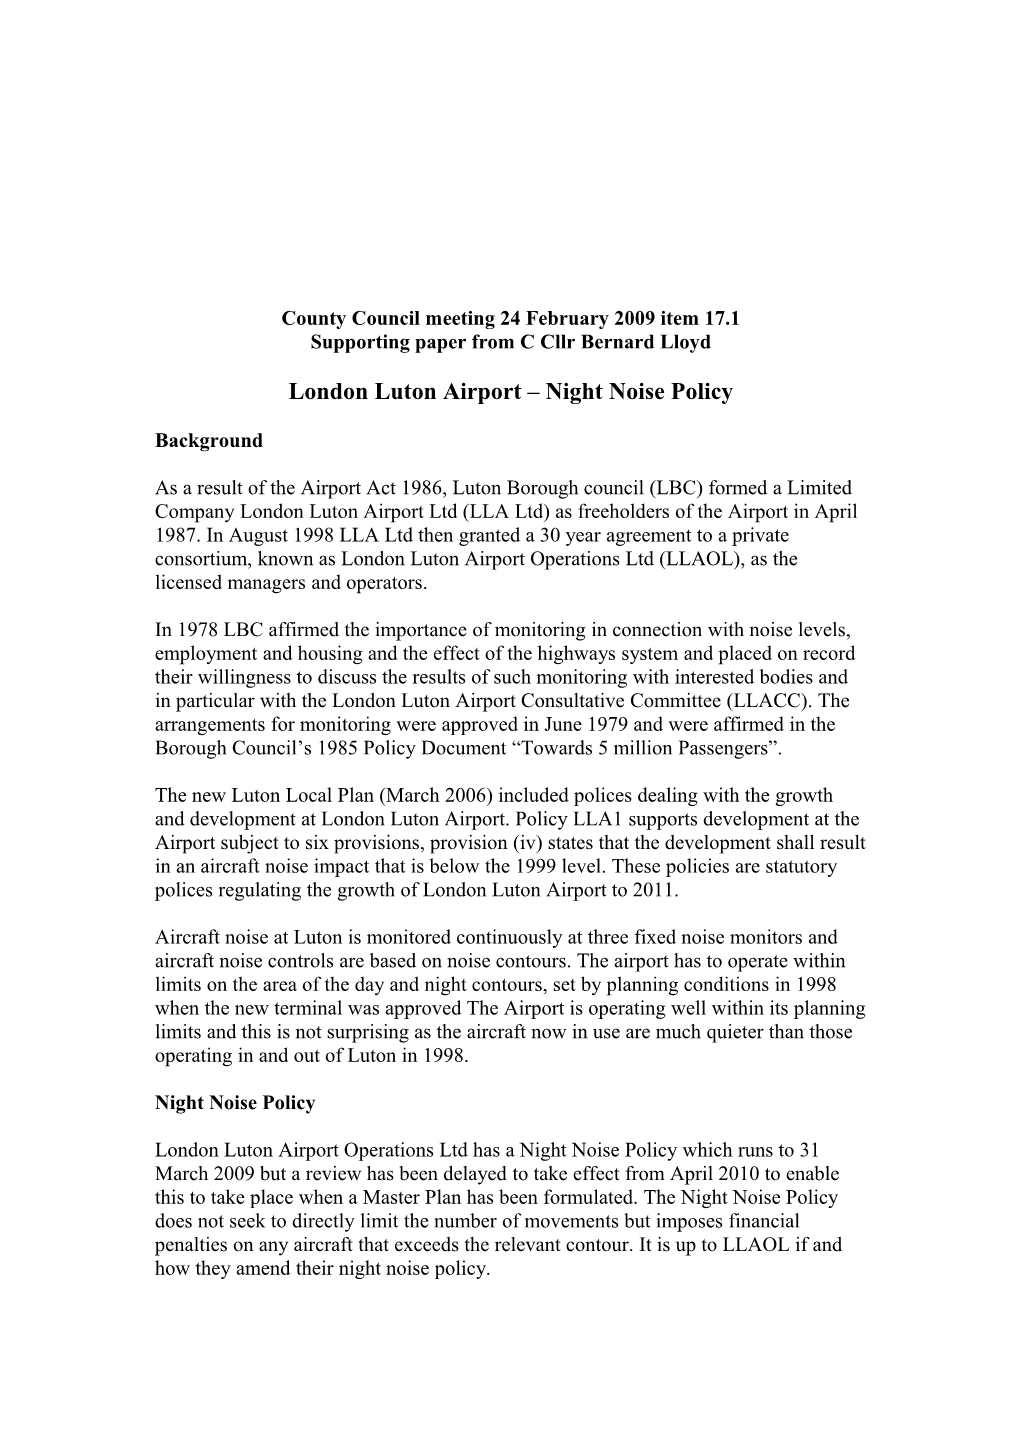 London Luton Airport Night Noise Policy